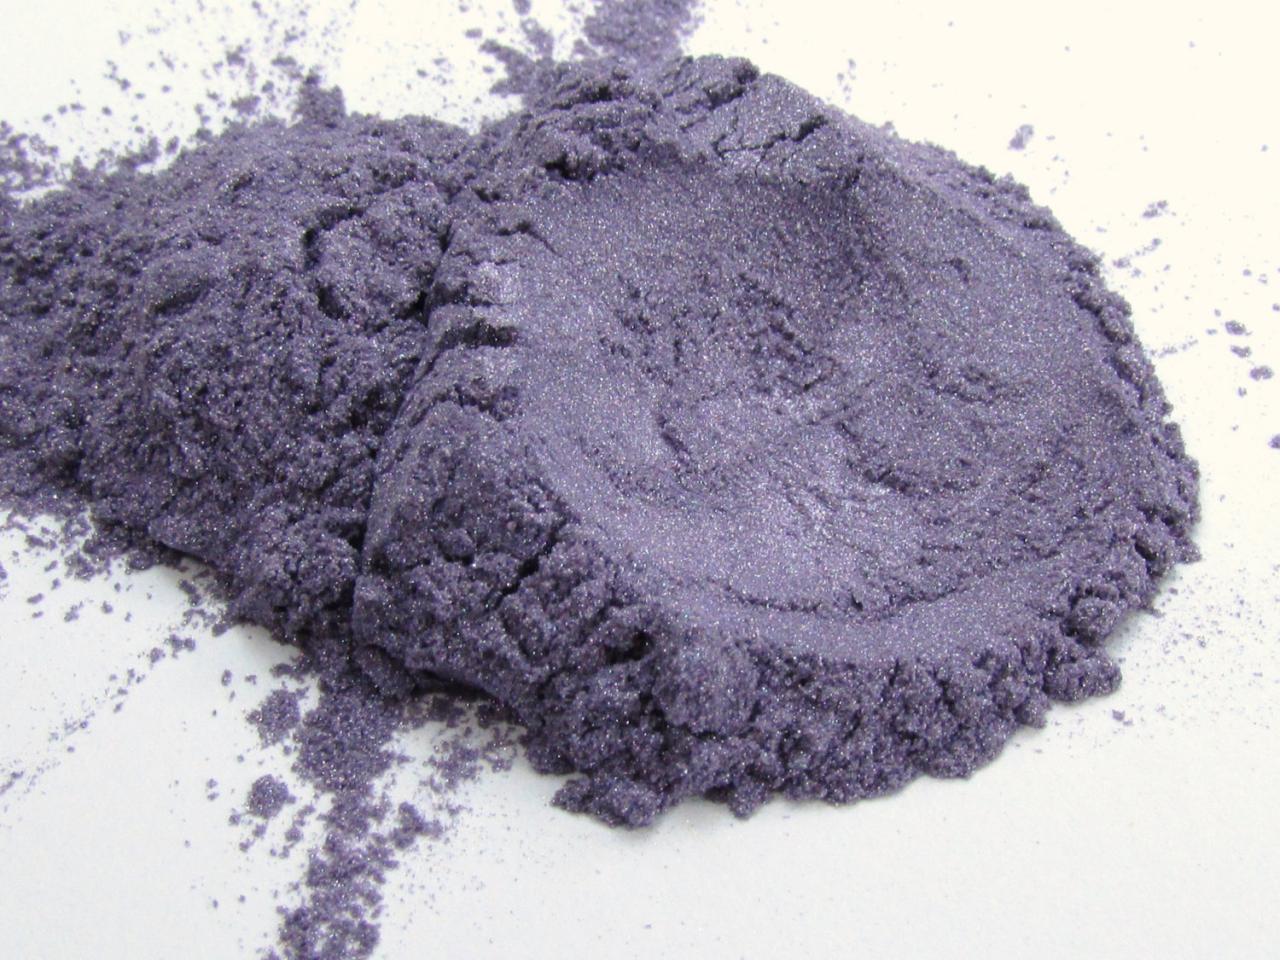 Mineral Eyeshadow, Natural Mineral Makeup, Vegan And Cruelty Eye Shadow - Orchid